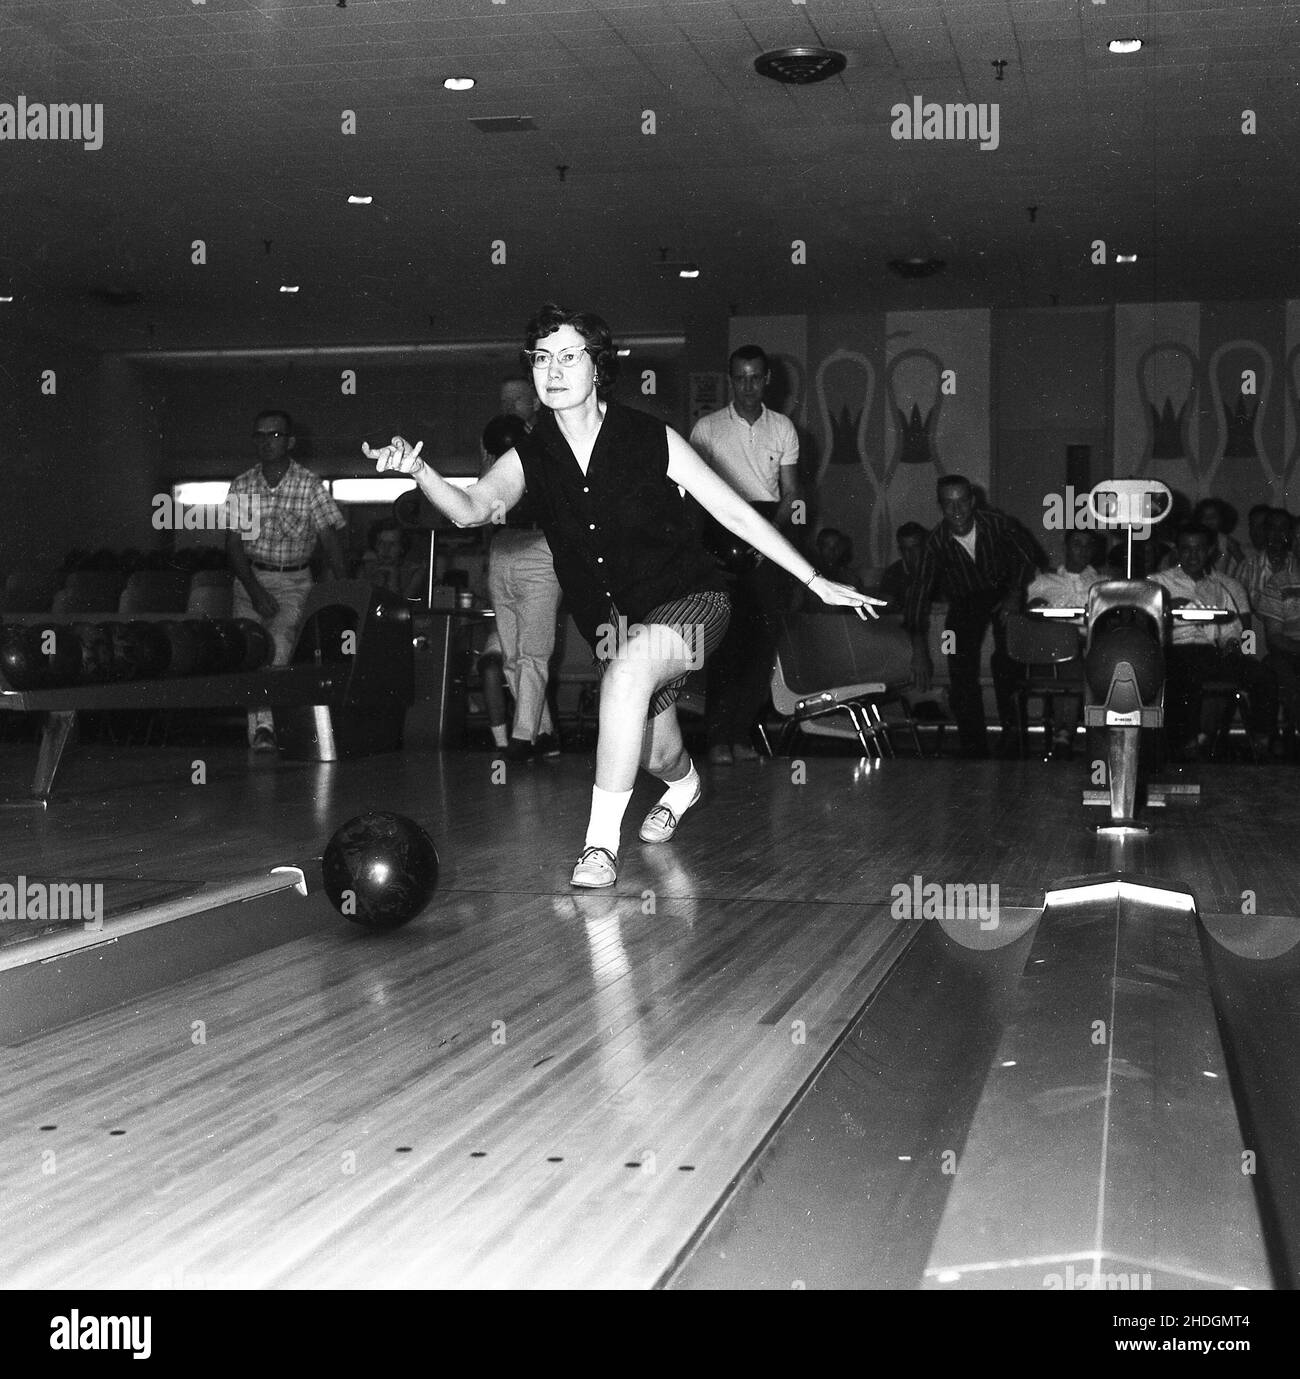 1960, historical, inside a ten-pin bowling hall, a woman player rolling a ball down a lane, Columbia, USA, showing good balance and technique.  Seen on the right is the gutter or channel, a trough shaped area, where the misplaced balls end up. In the 1950s and 60s, a popular lesiure pastime in the USA, tenpin was also a competitive sport, with an organised, competitive league structure, with both men and women teams. The Professional Bowlers Association of America (PBA) was founded in 1958. Stock Photo